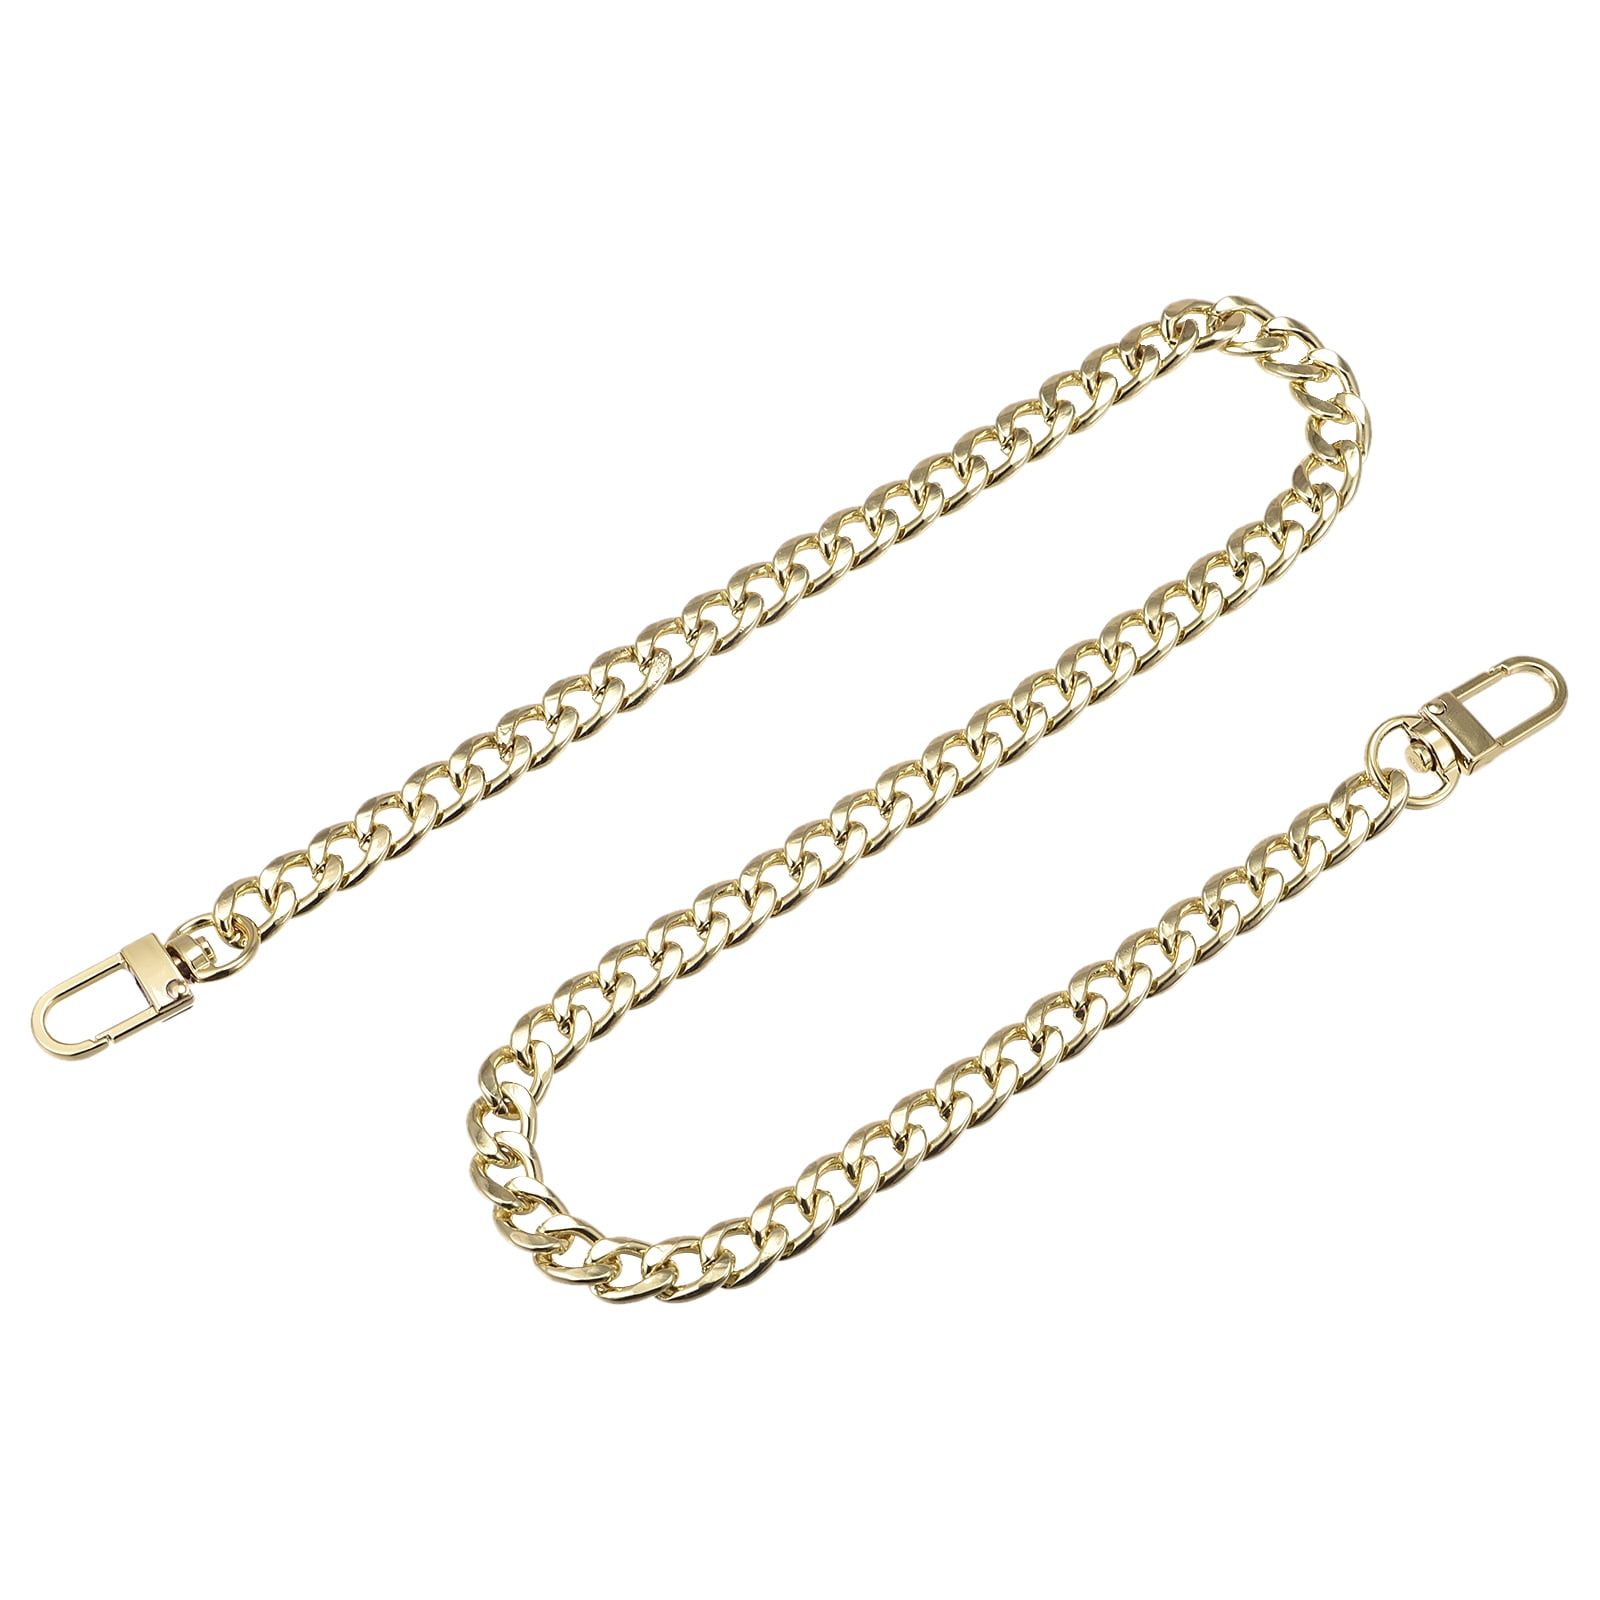 LOVLLE 4 pcs gold purse chain strap - flat iron bag chains with d ring  rivets for